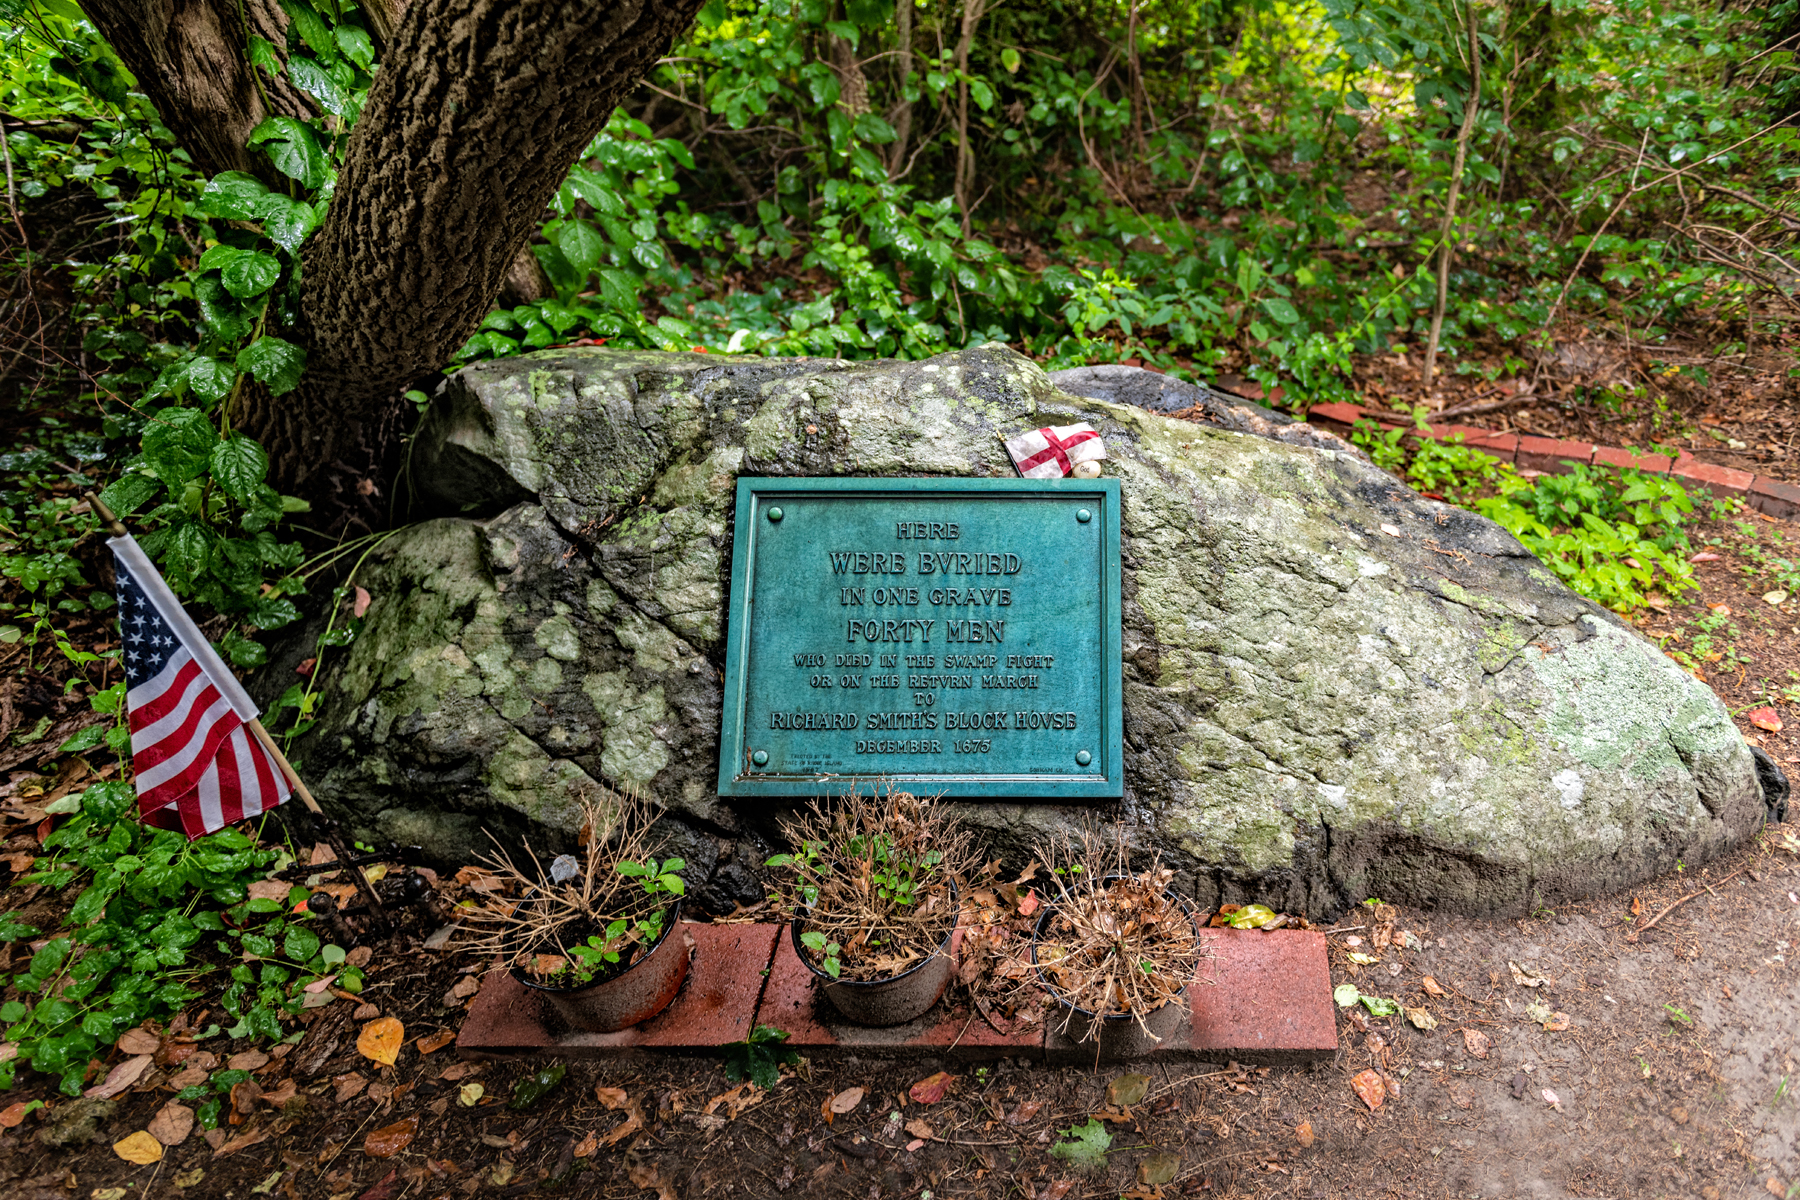 The mass grave at Smith's Castle. Photo by Frank Grace.